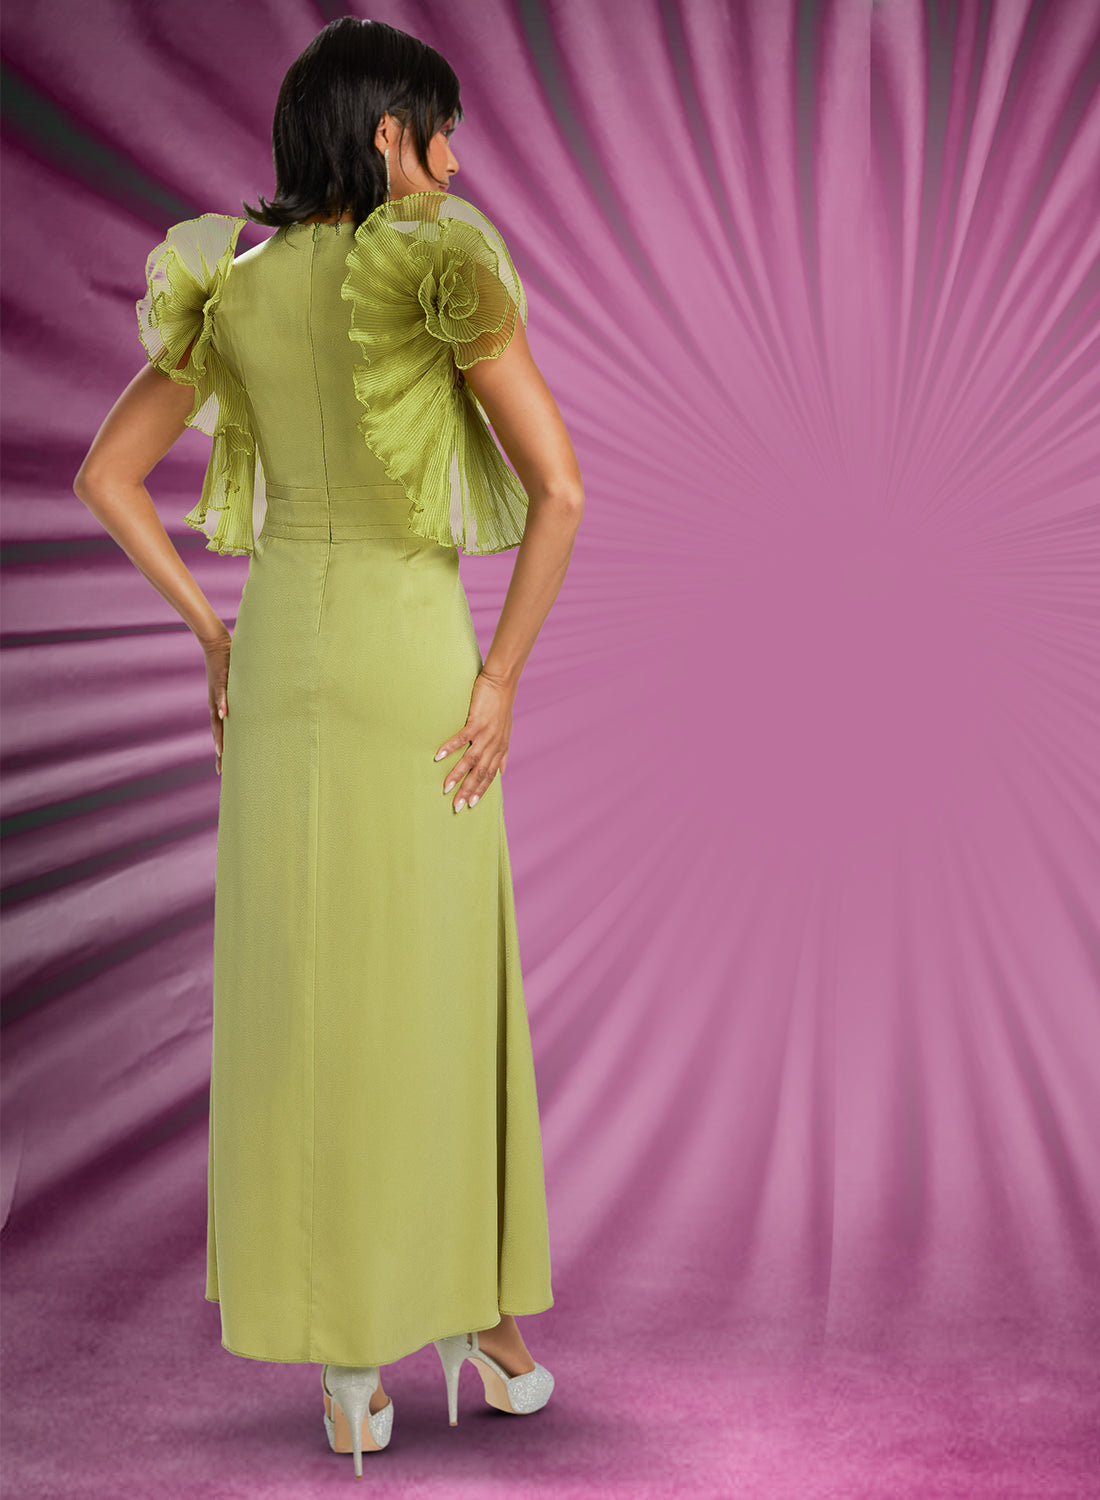 Donna Vinci 5797 - 1 PC Crepe Dress with Organza Features and Rhinestones